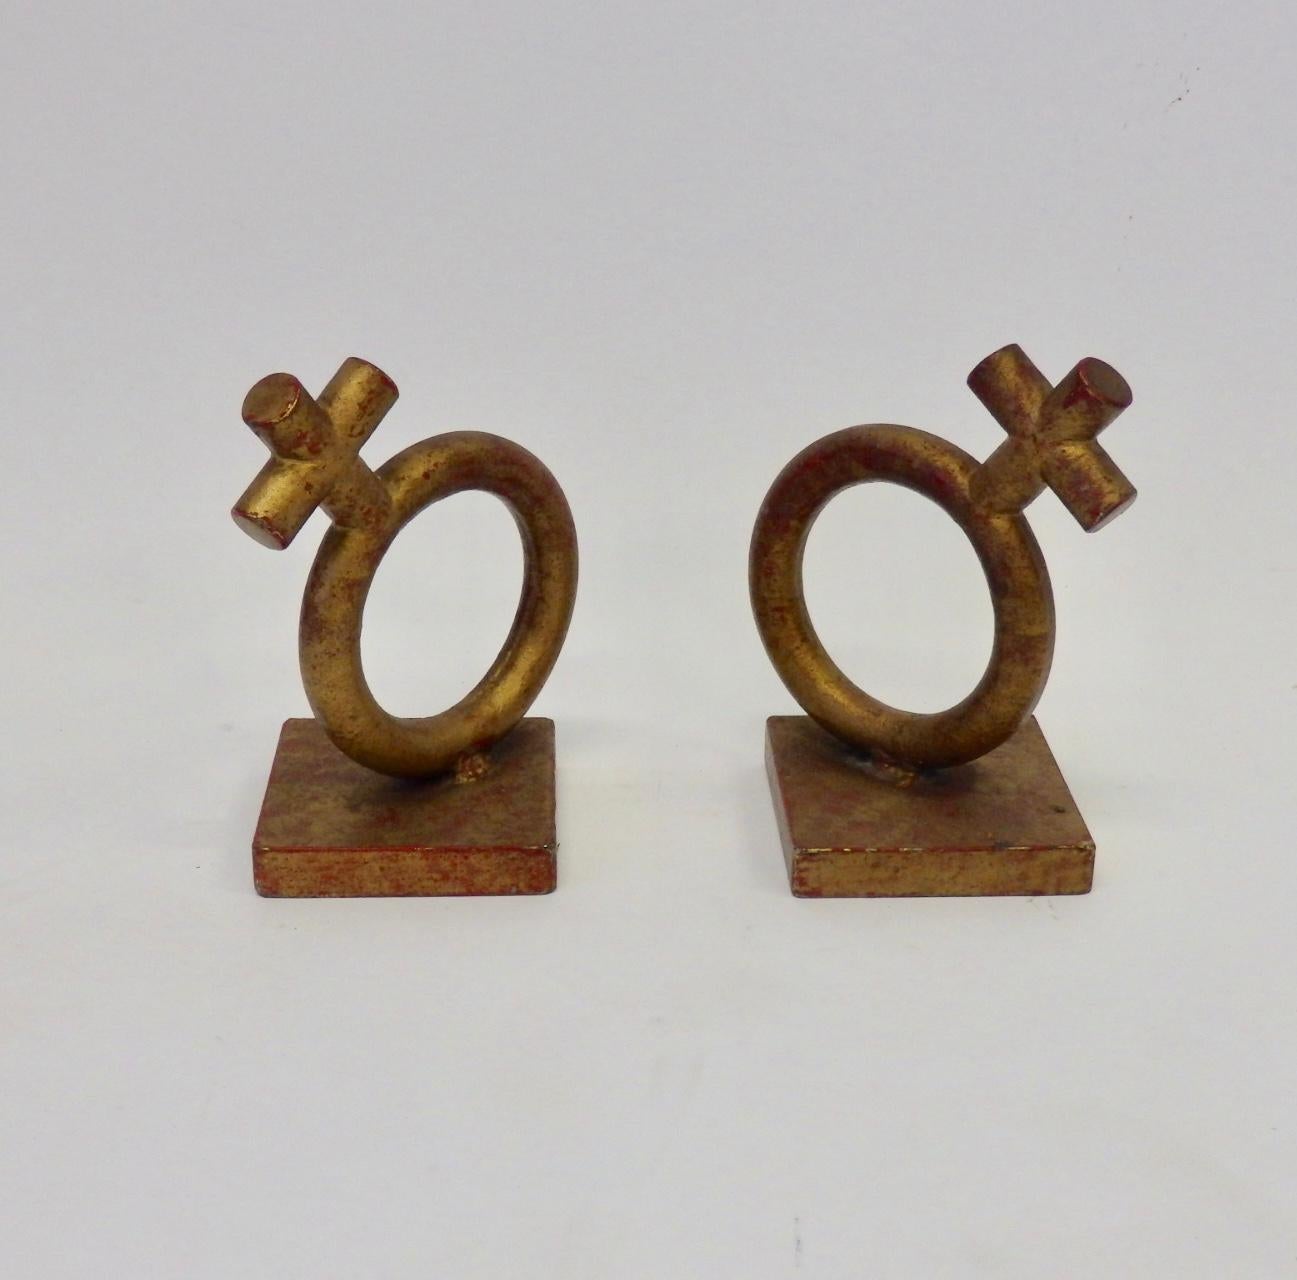 Cast Wrought Iron Venus Bookends by Jere